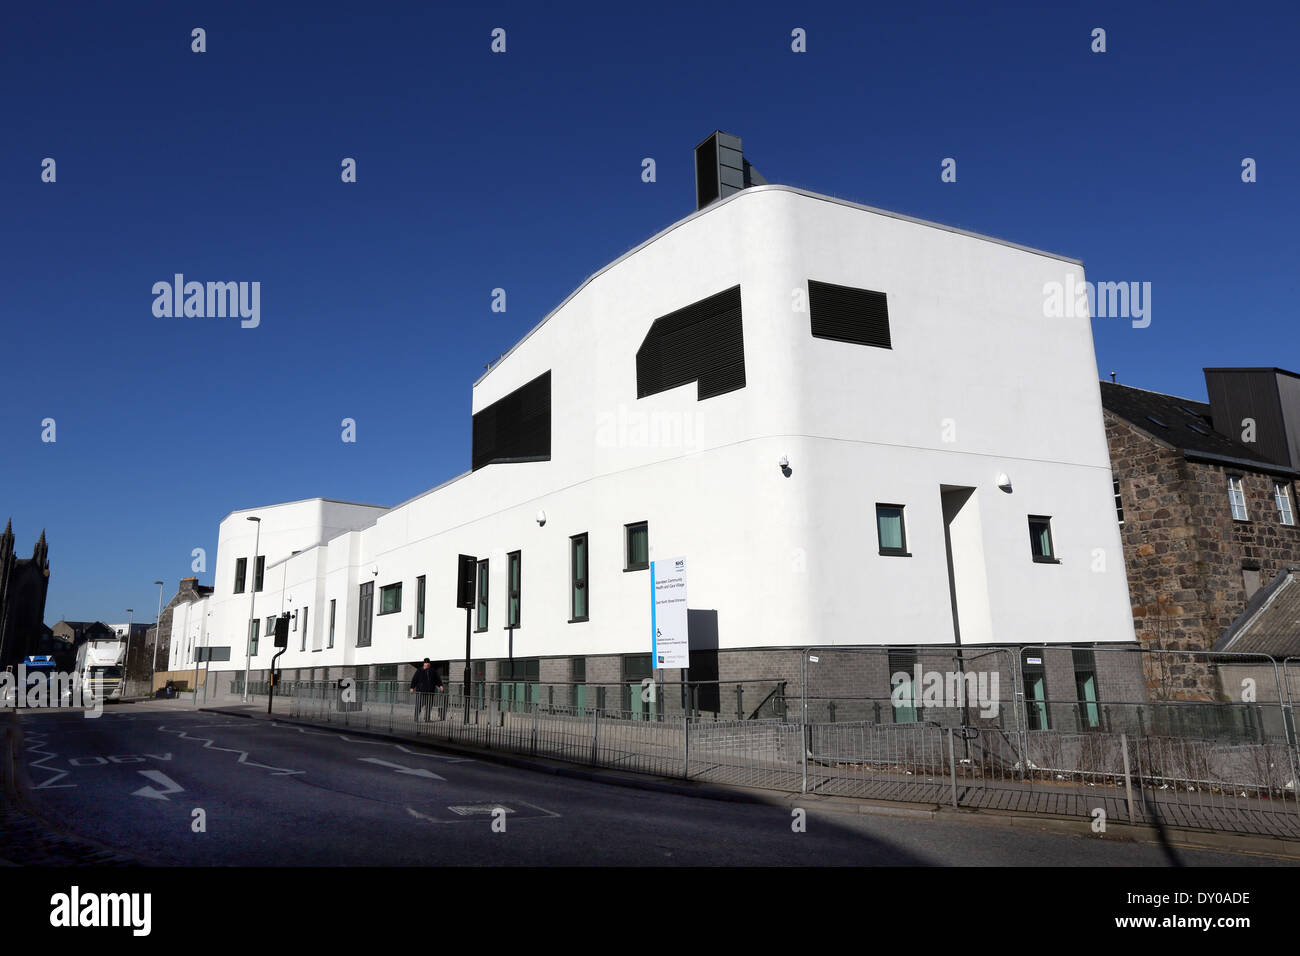 Exterior of Aberdeen Community Health and care Village in the city of Aberdeen, Scotland, UK Stock Photo